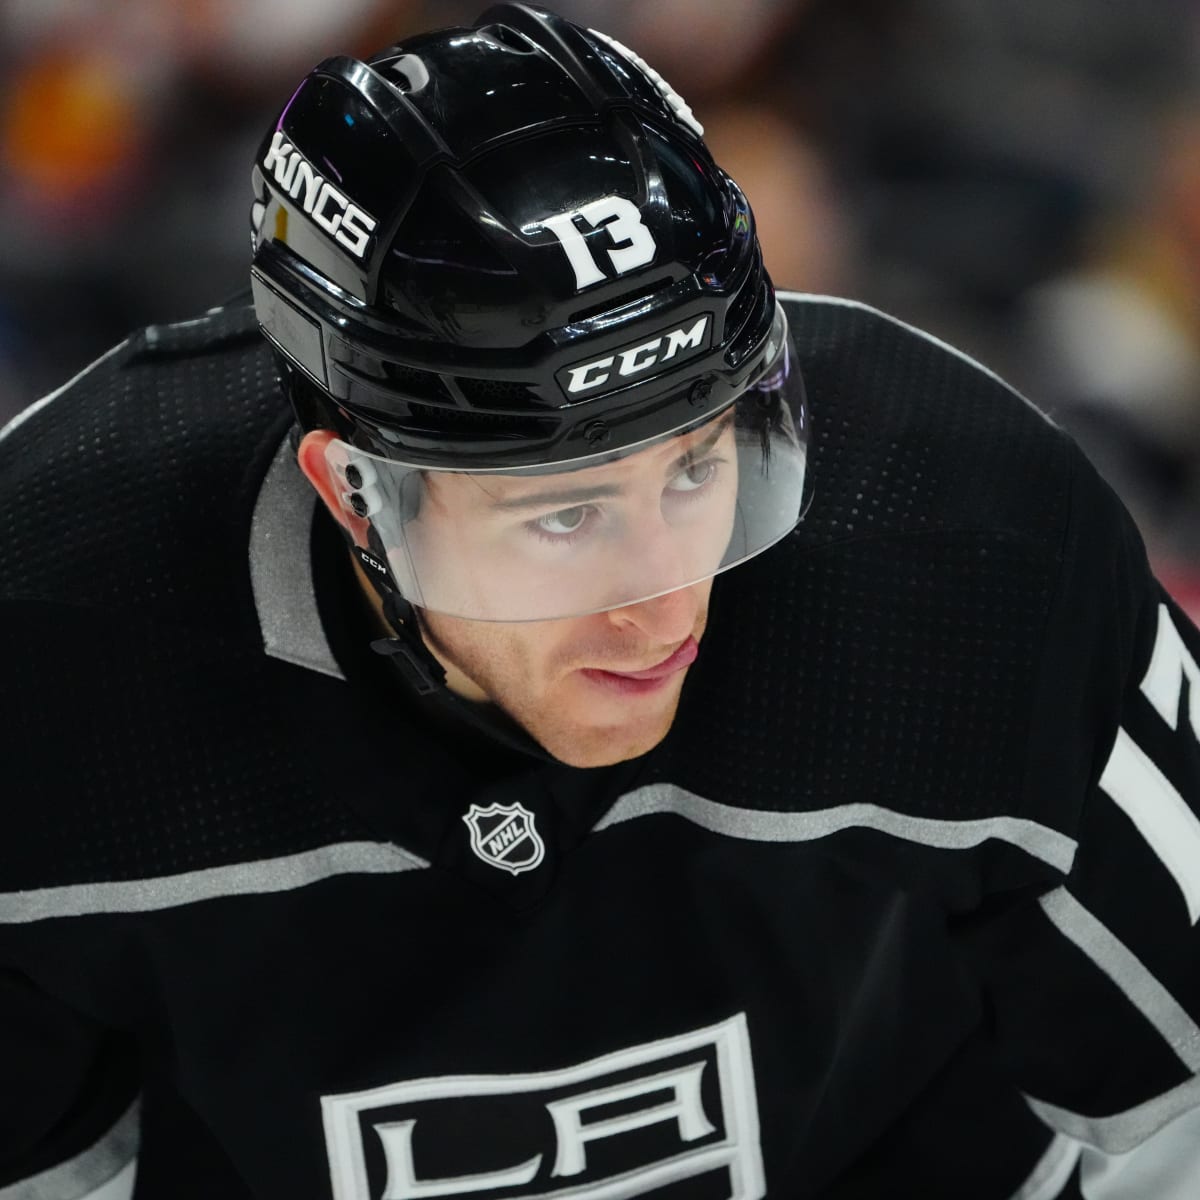 Early Thoughts on LA Kings 2021-22 Lineup Projection